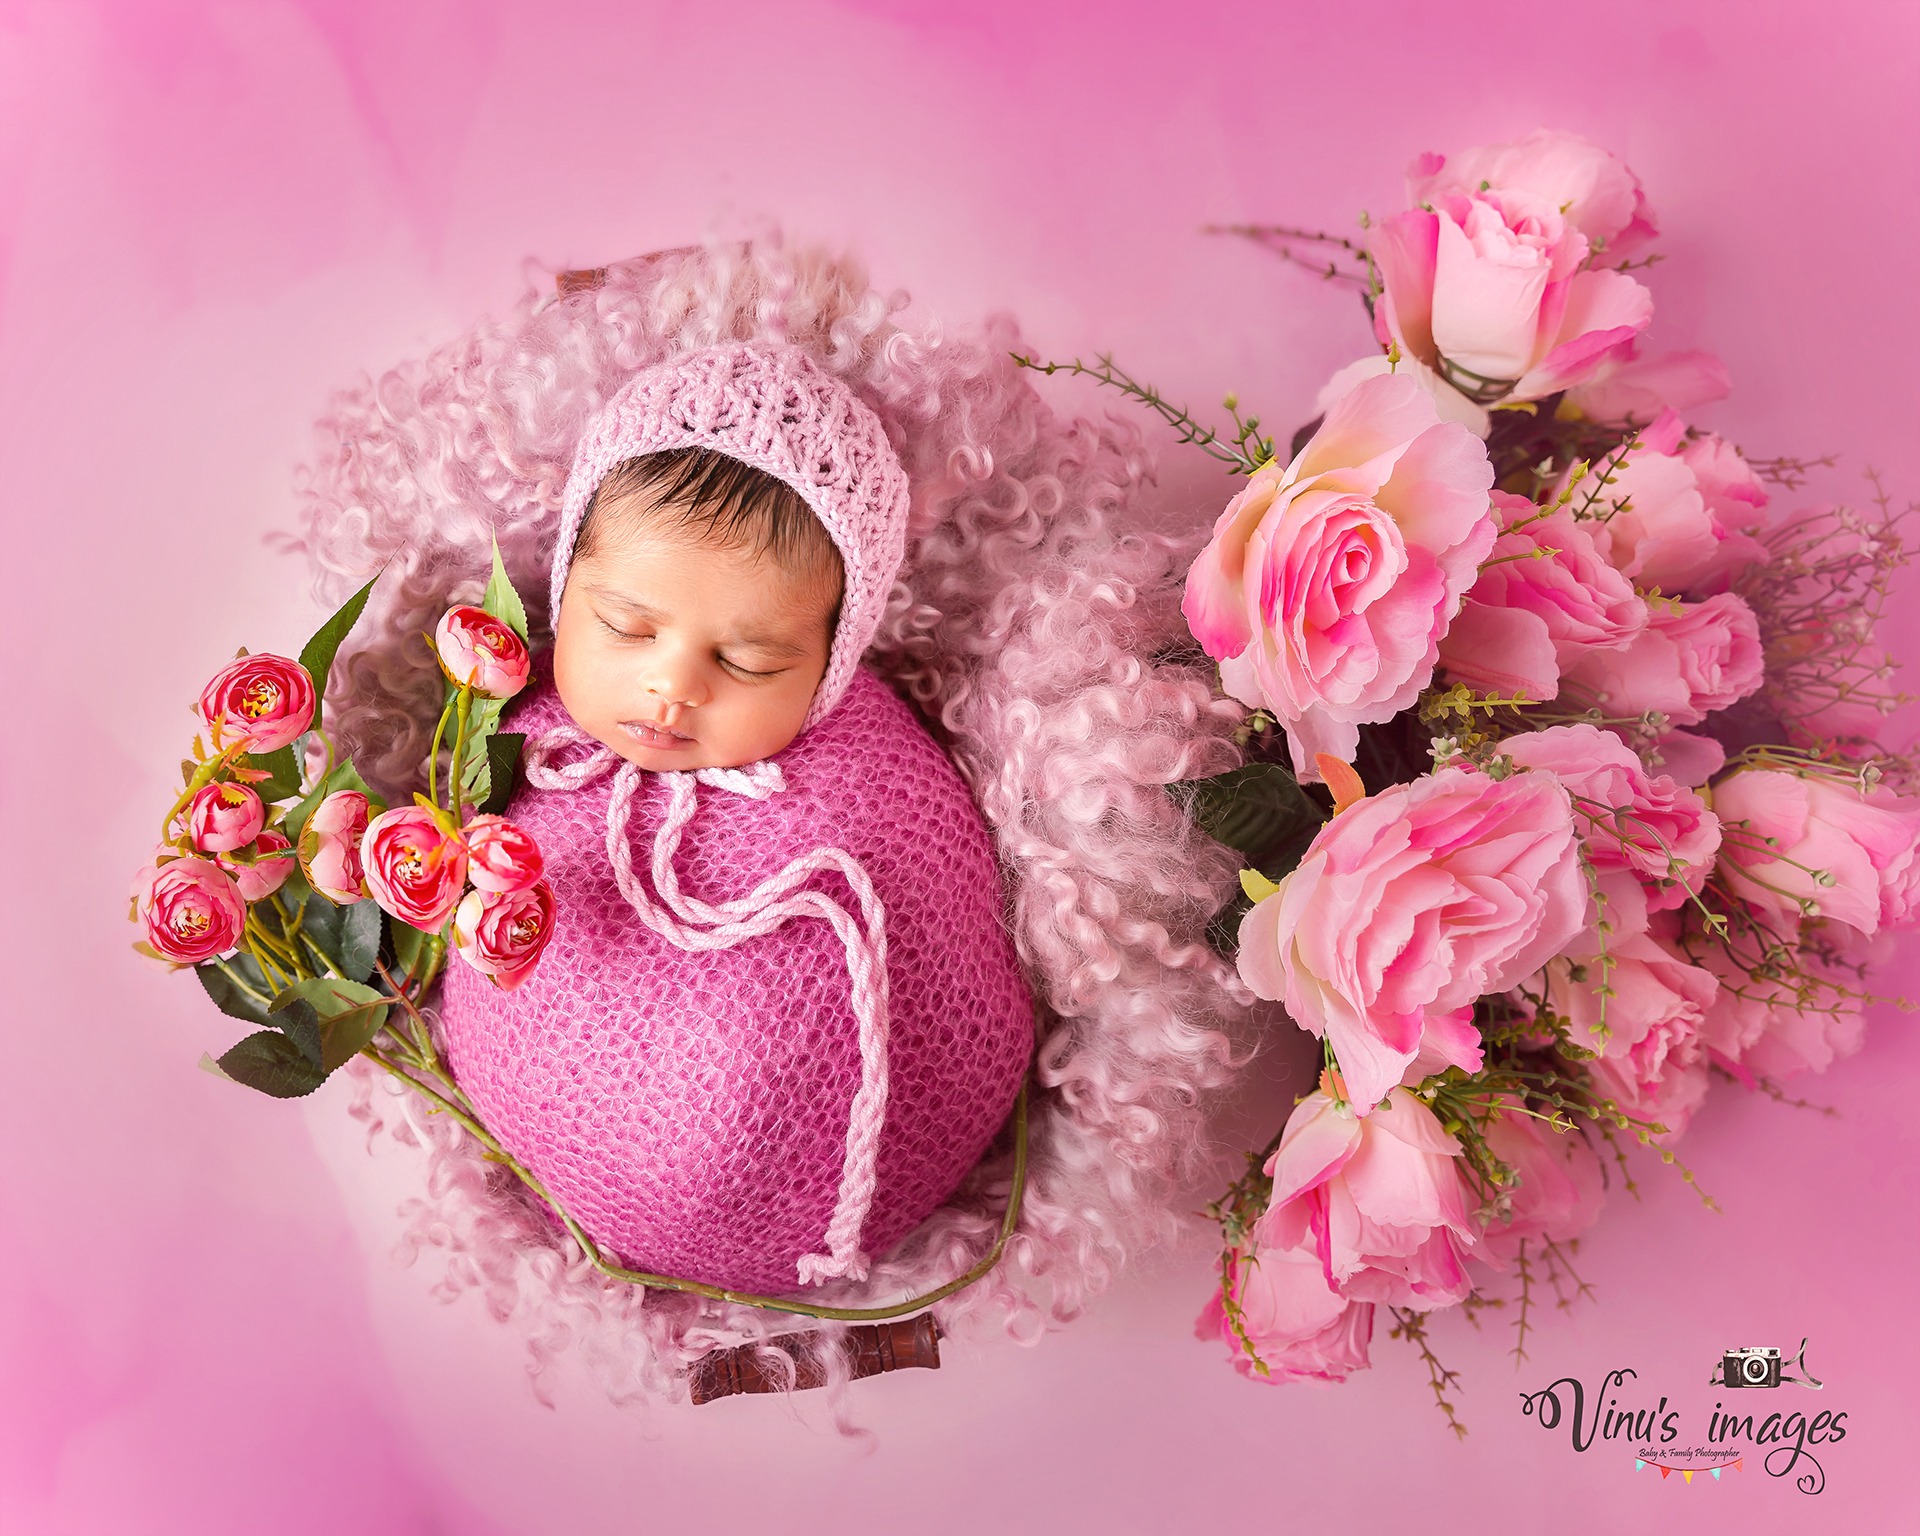 Wool and Floral theme for baby girl photoshoot in Delhi, Noida by Vinus Images